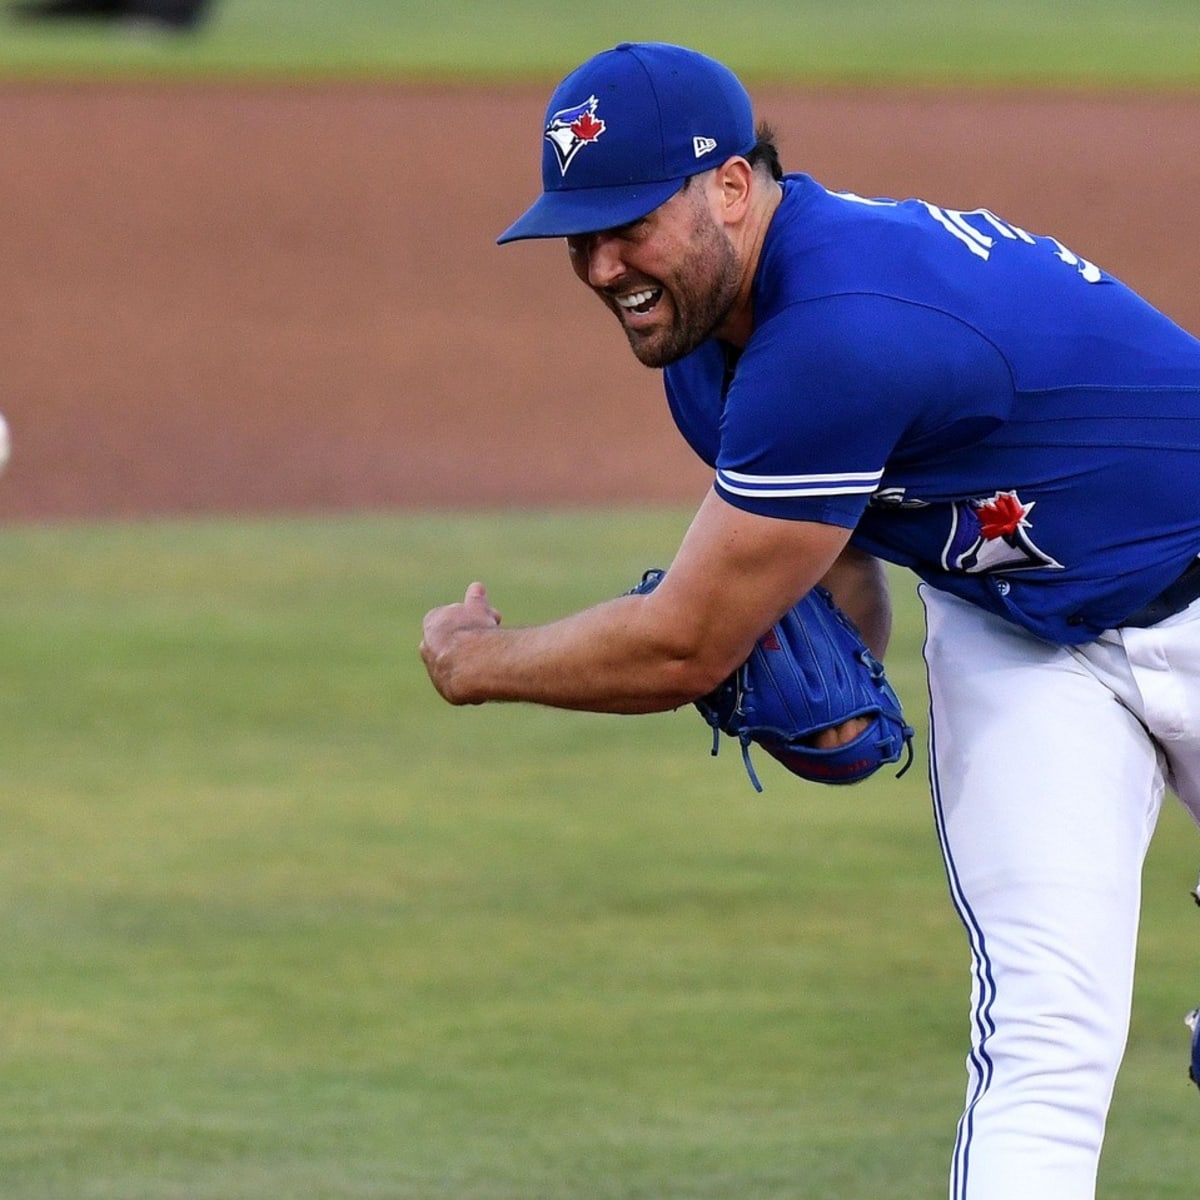 Blue Jays Starter Hyun Jin Ryu Rocked For Seven Runs in Loss - Sports  Illustrated Toronto Blue Jays News, Analysis and More